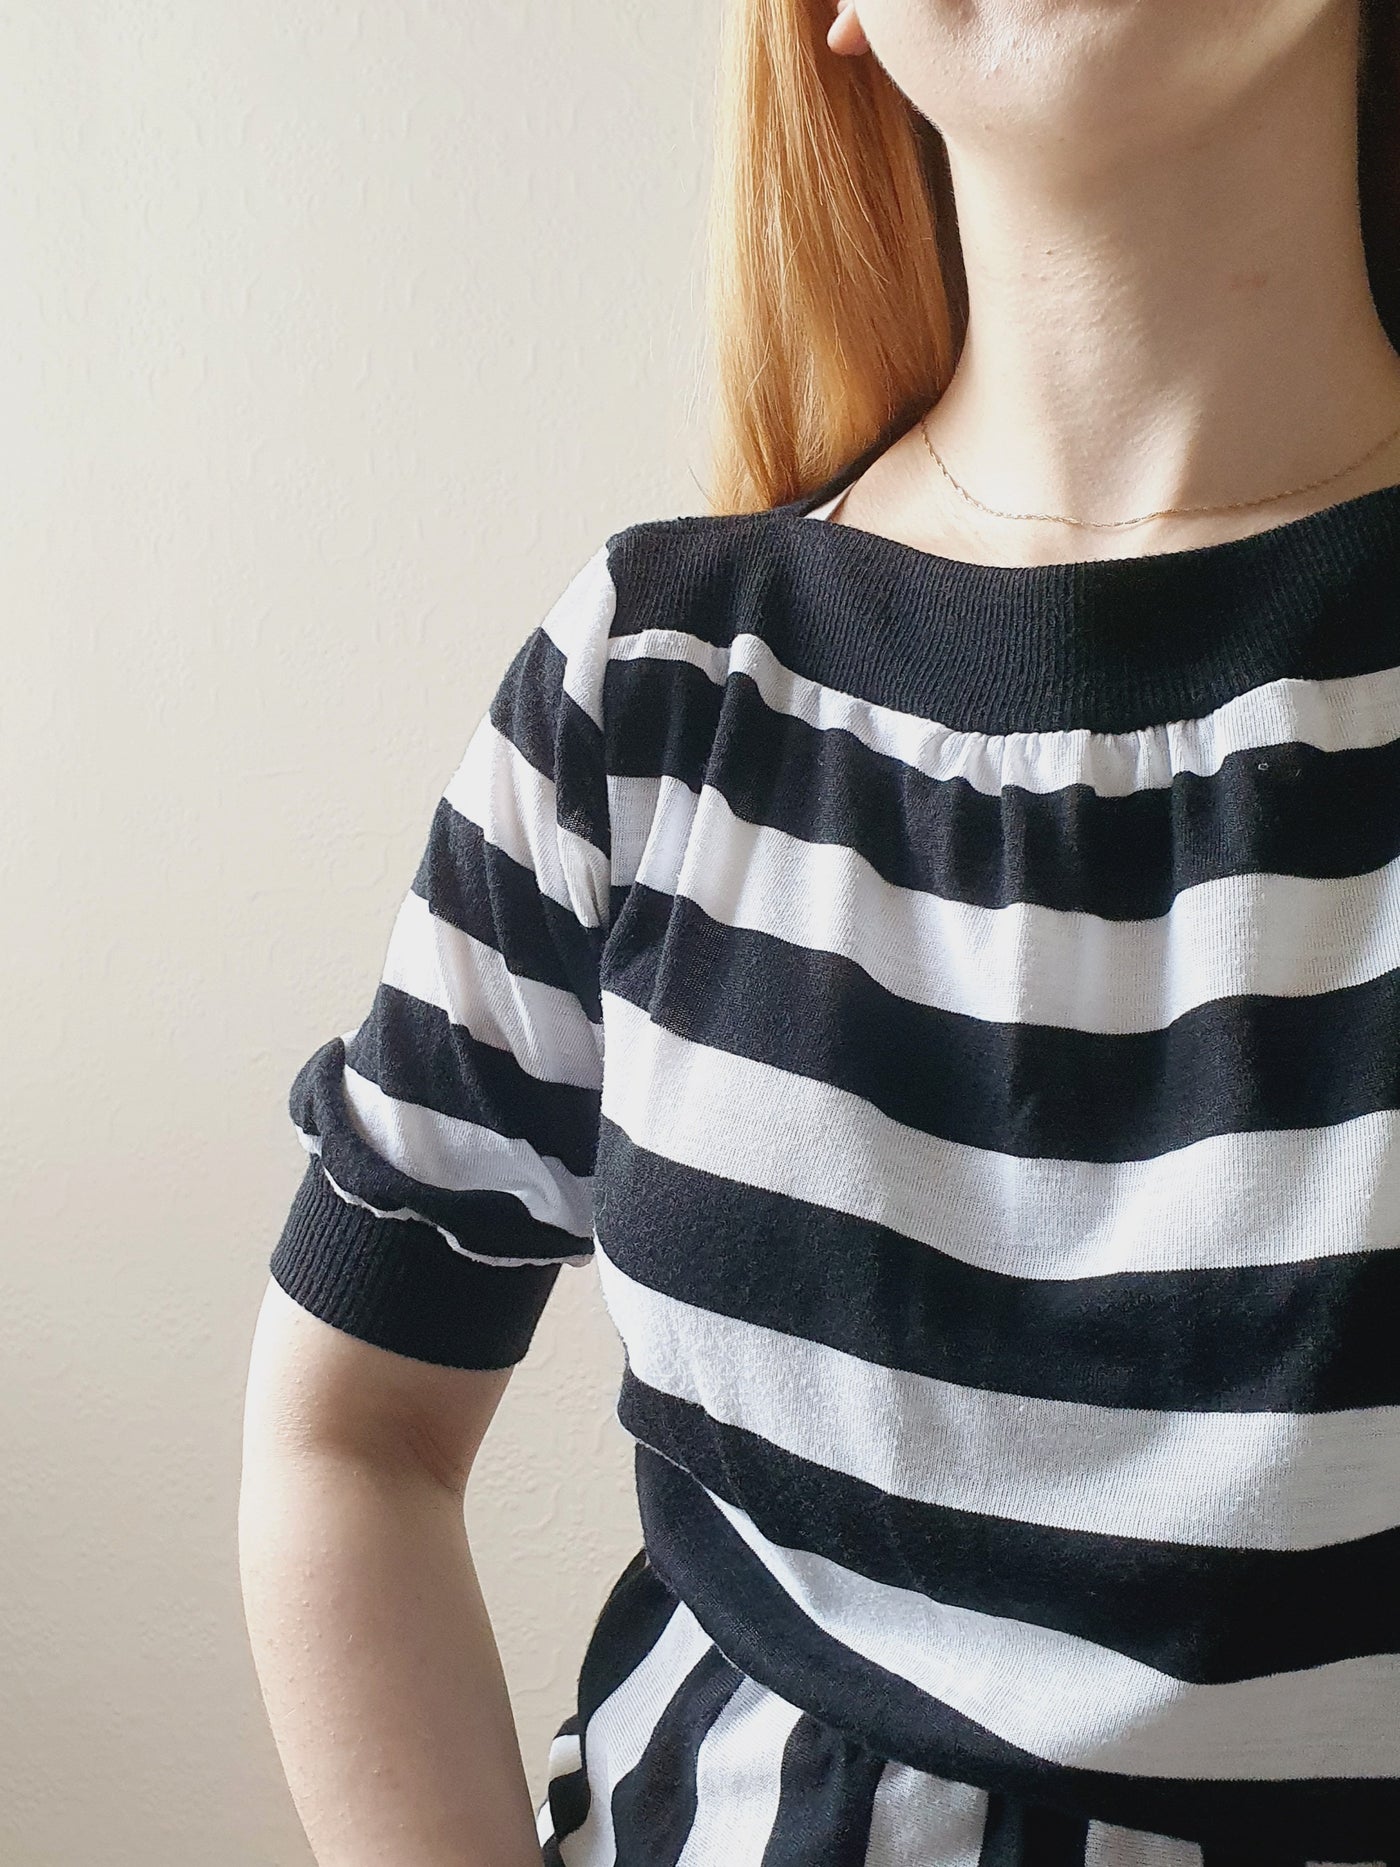 Black & White Striped Fitted Dress - S